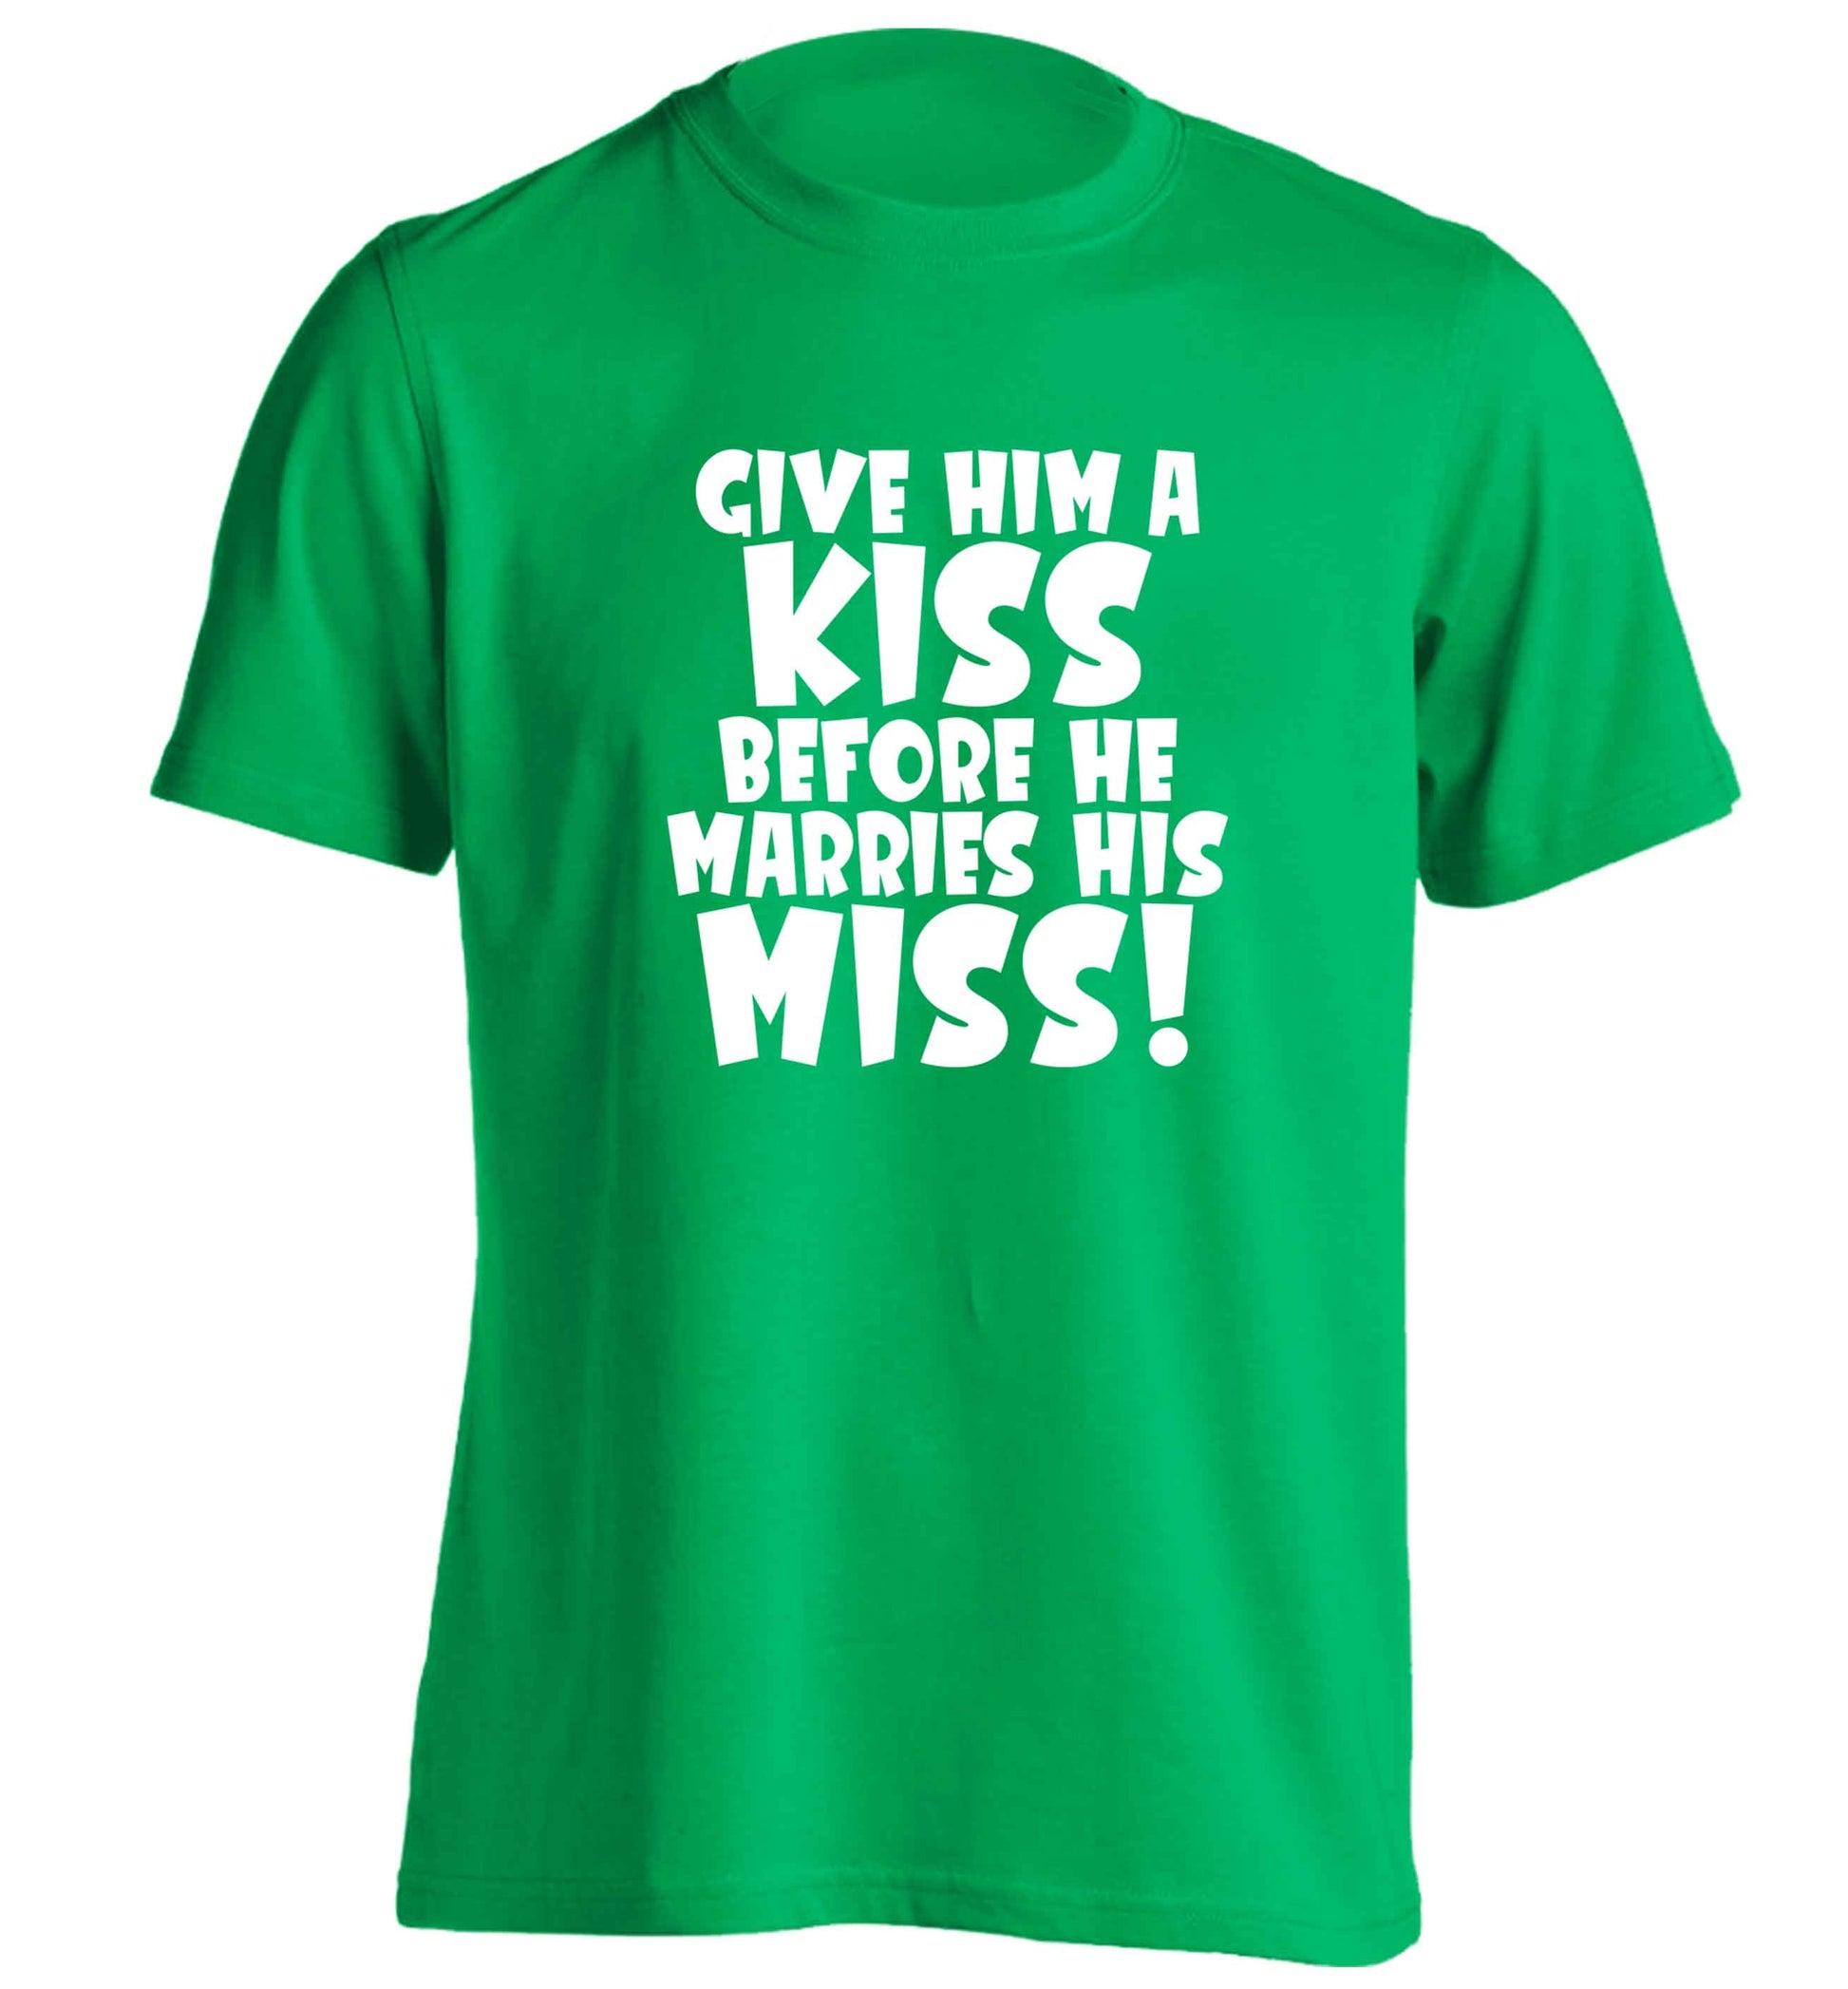 Give him a kiss before he marries his miss adults unisex green Tshirt 2XL